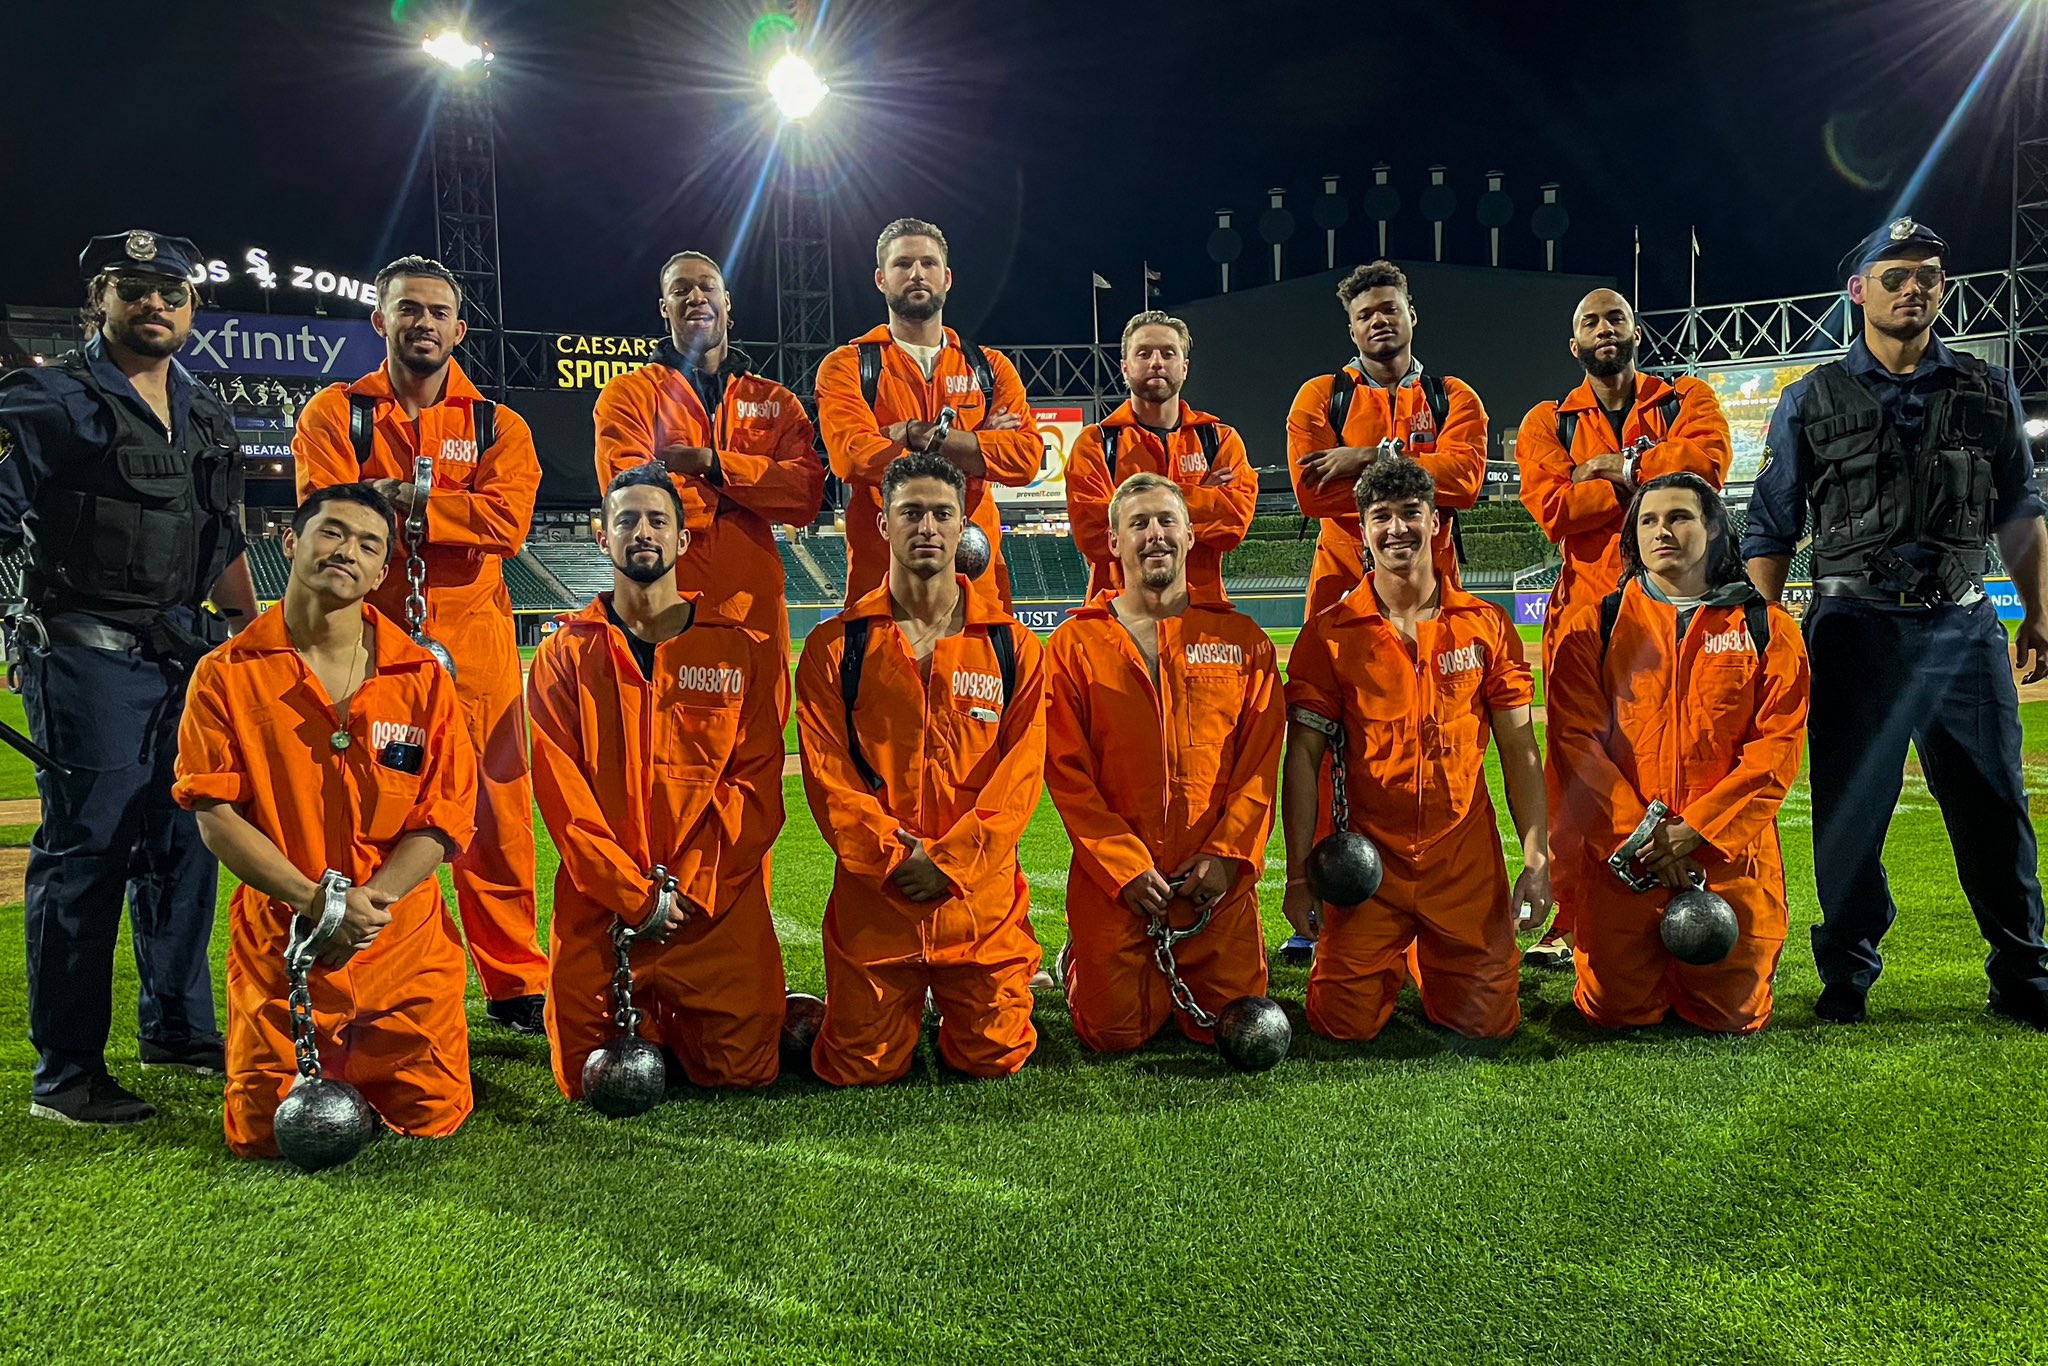 Cleveland Guardians criticized for photo showing players dressed as inmates  